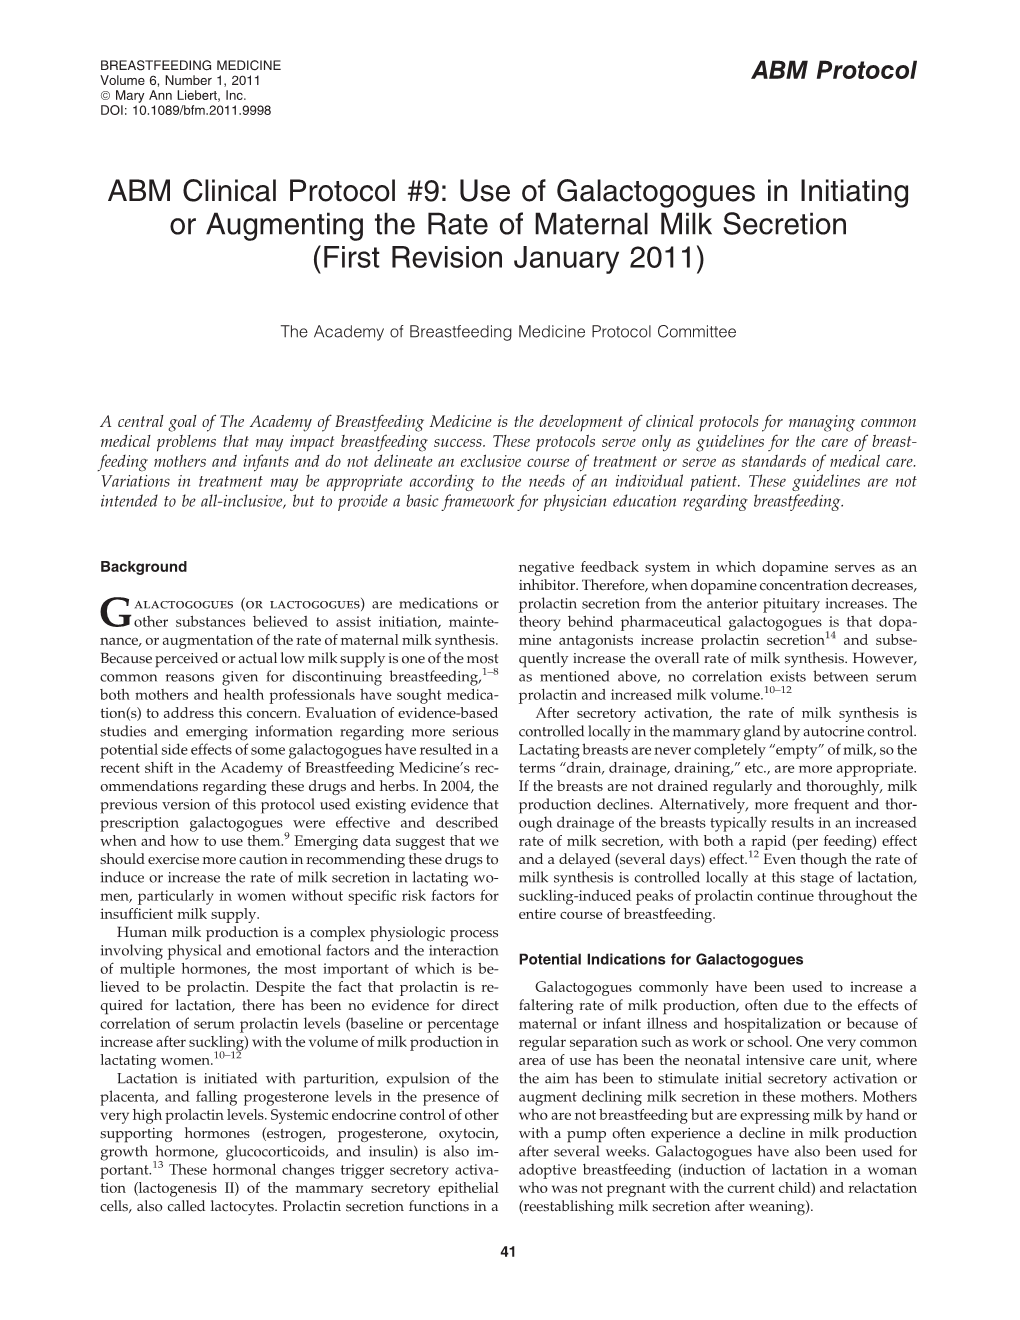 ABM Clinical Protocol #9: Use of Galactogogues in Initiating Or Augmenting the Rate of Maternal Milk Secretion (First Revision January 2011)